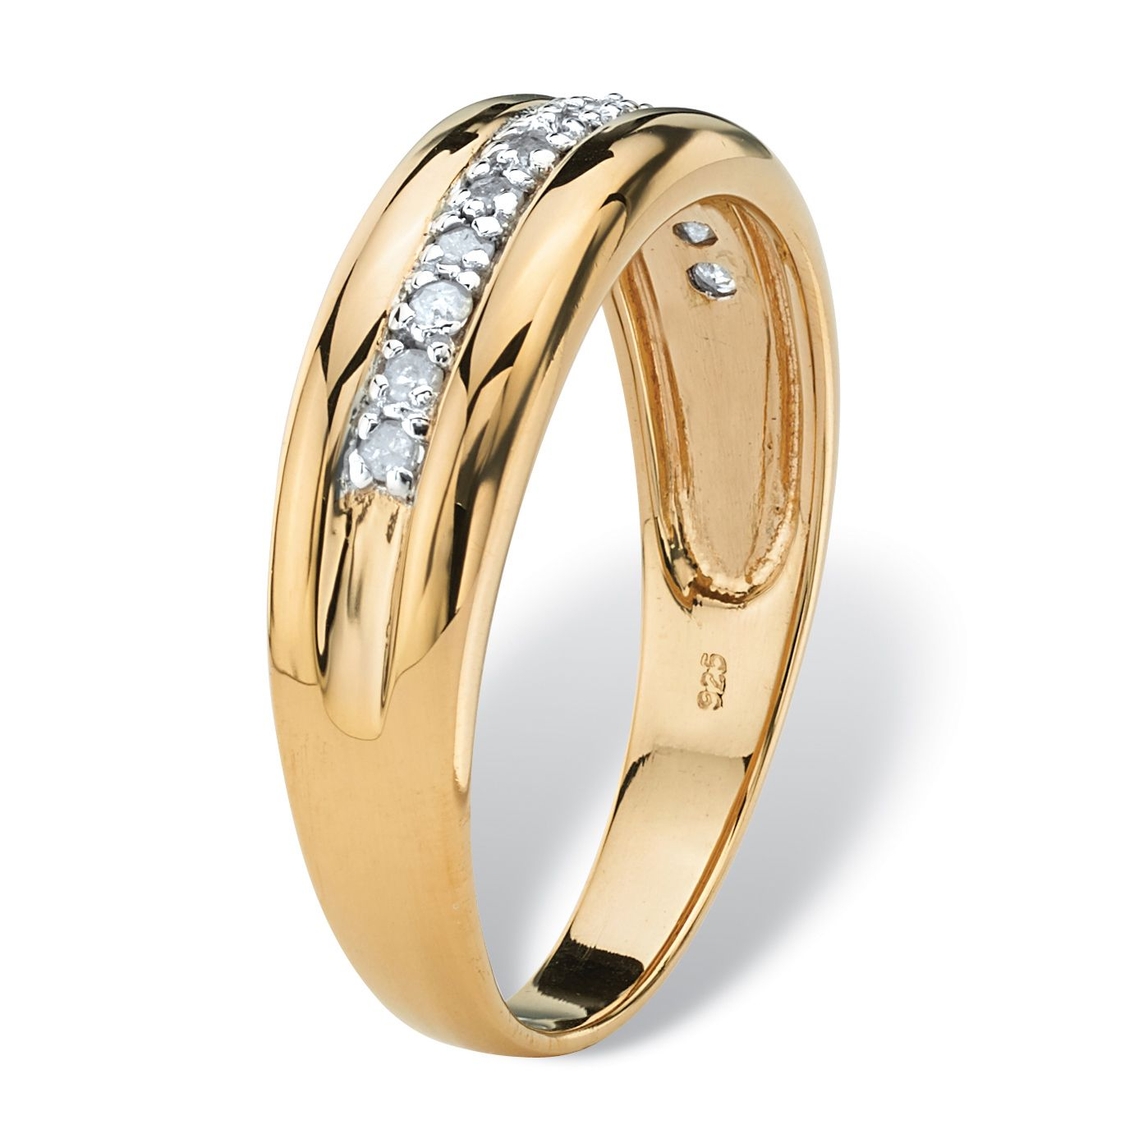 Men's 1/5 TCW Diamond Band in 18k Gold-plated Sterling Silver - Image 2 of 5